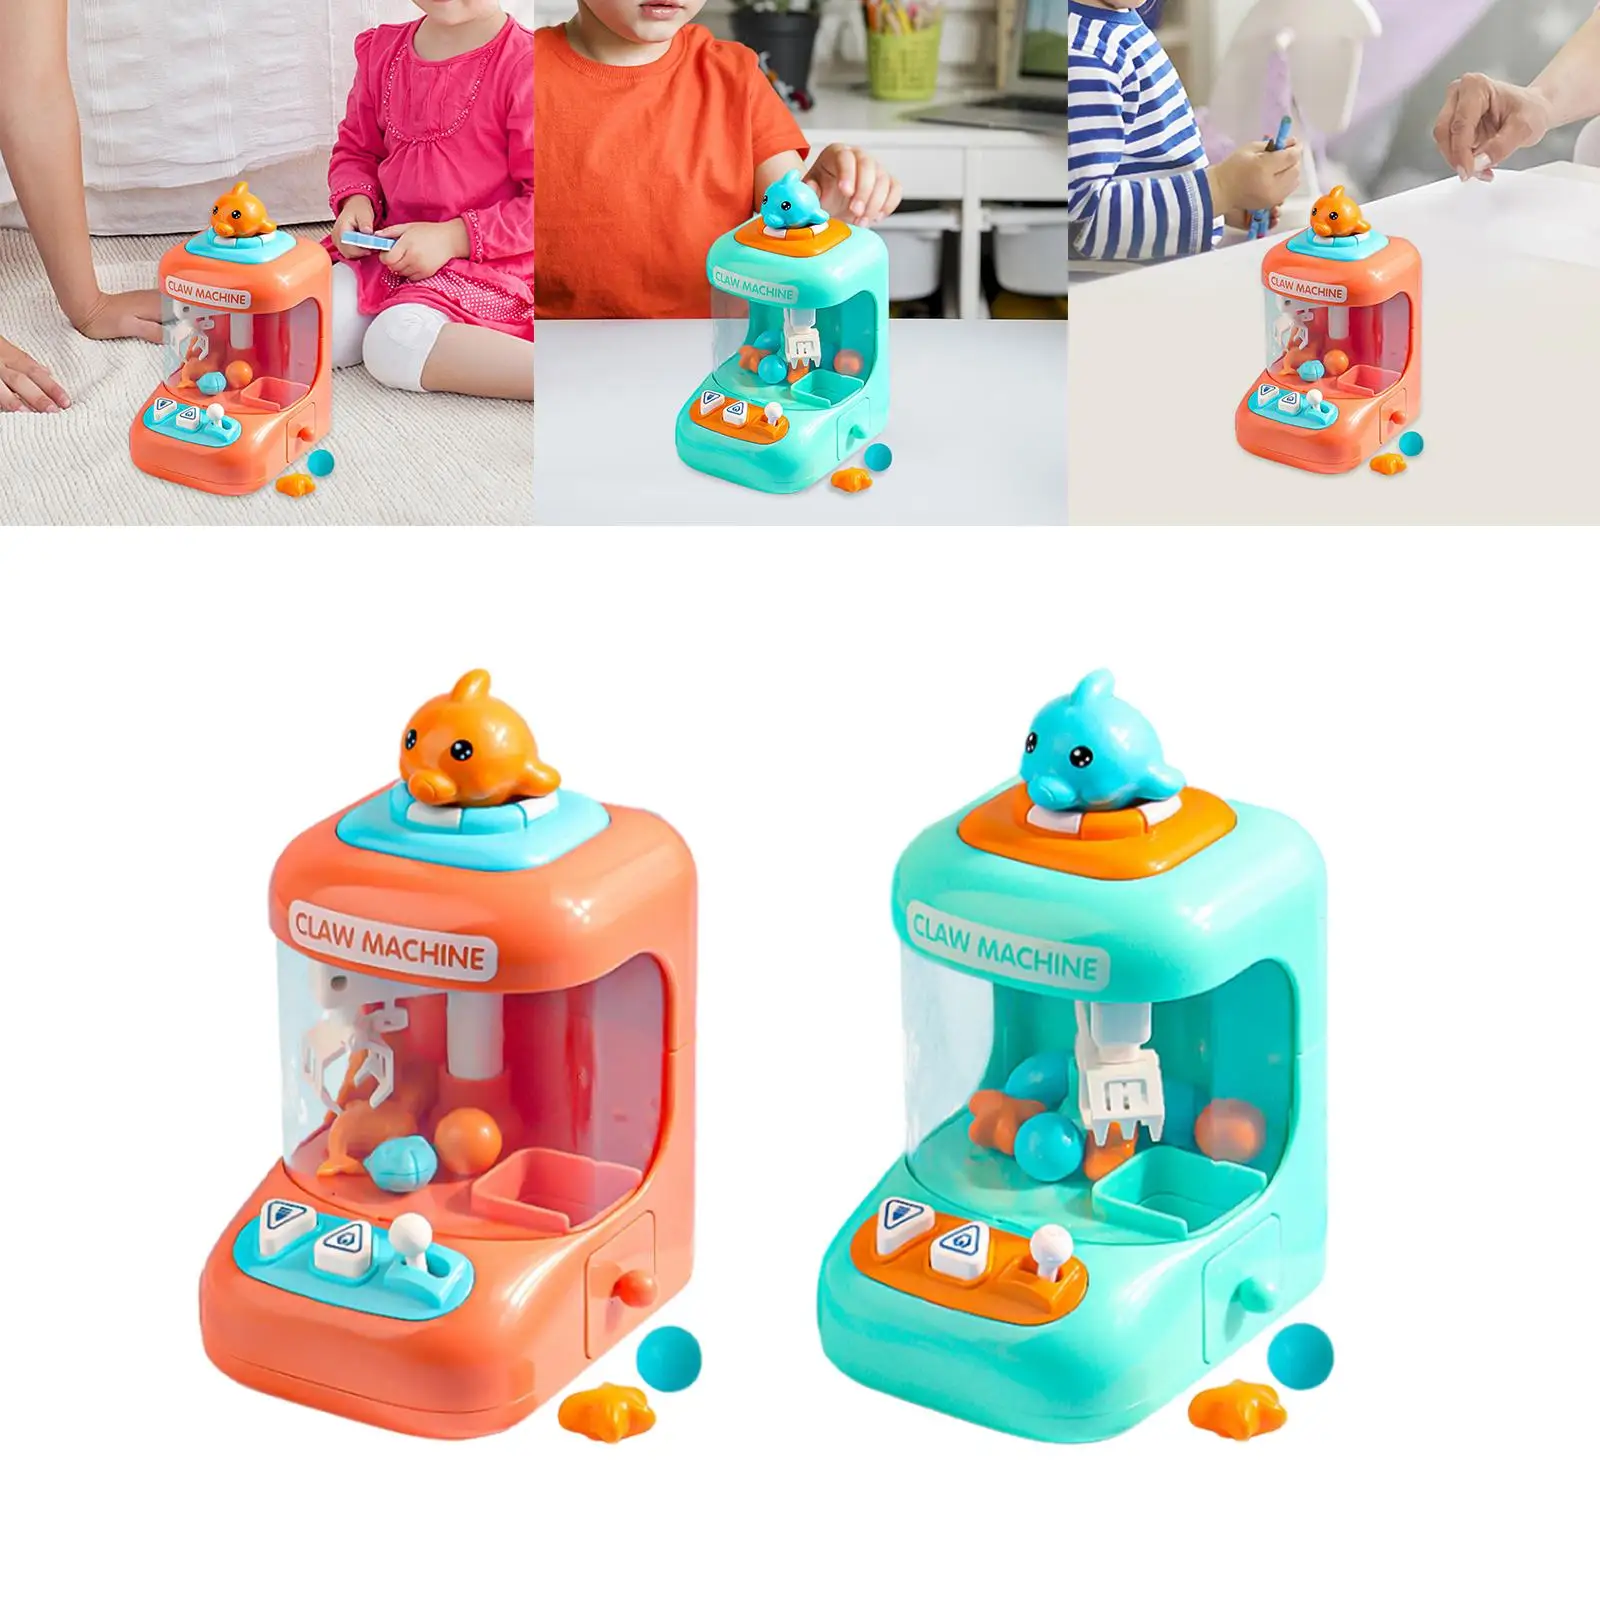 Kids Claw Machine Portable Arcade Toys with Light Claw Machine Arcade Game for Baby Birthday Gifts Adults Home Boys Girls Kids